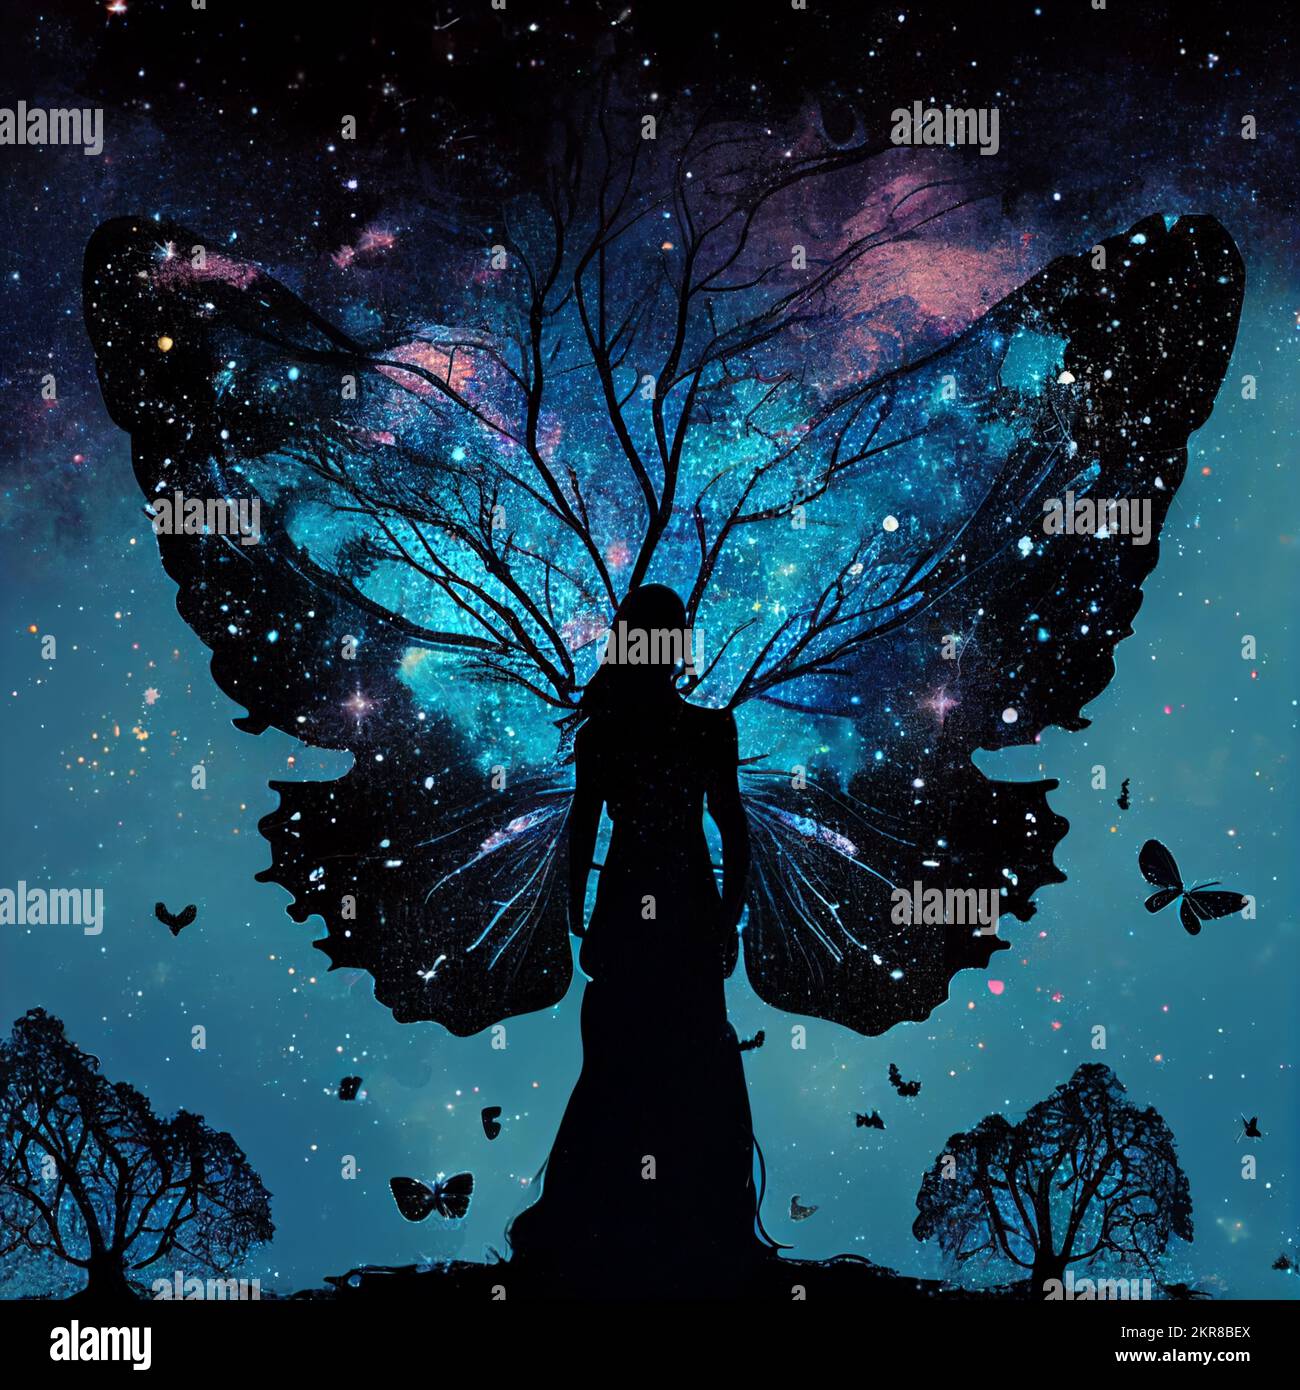 A woman blended with a tree, with fairy wings silhouetted against nebulas and starry skies Stock Photo